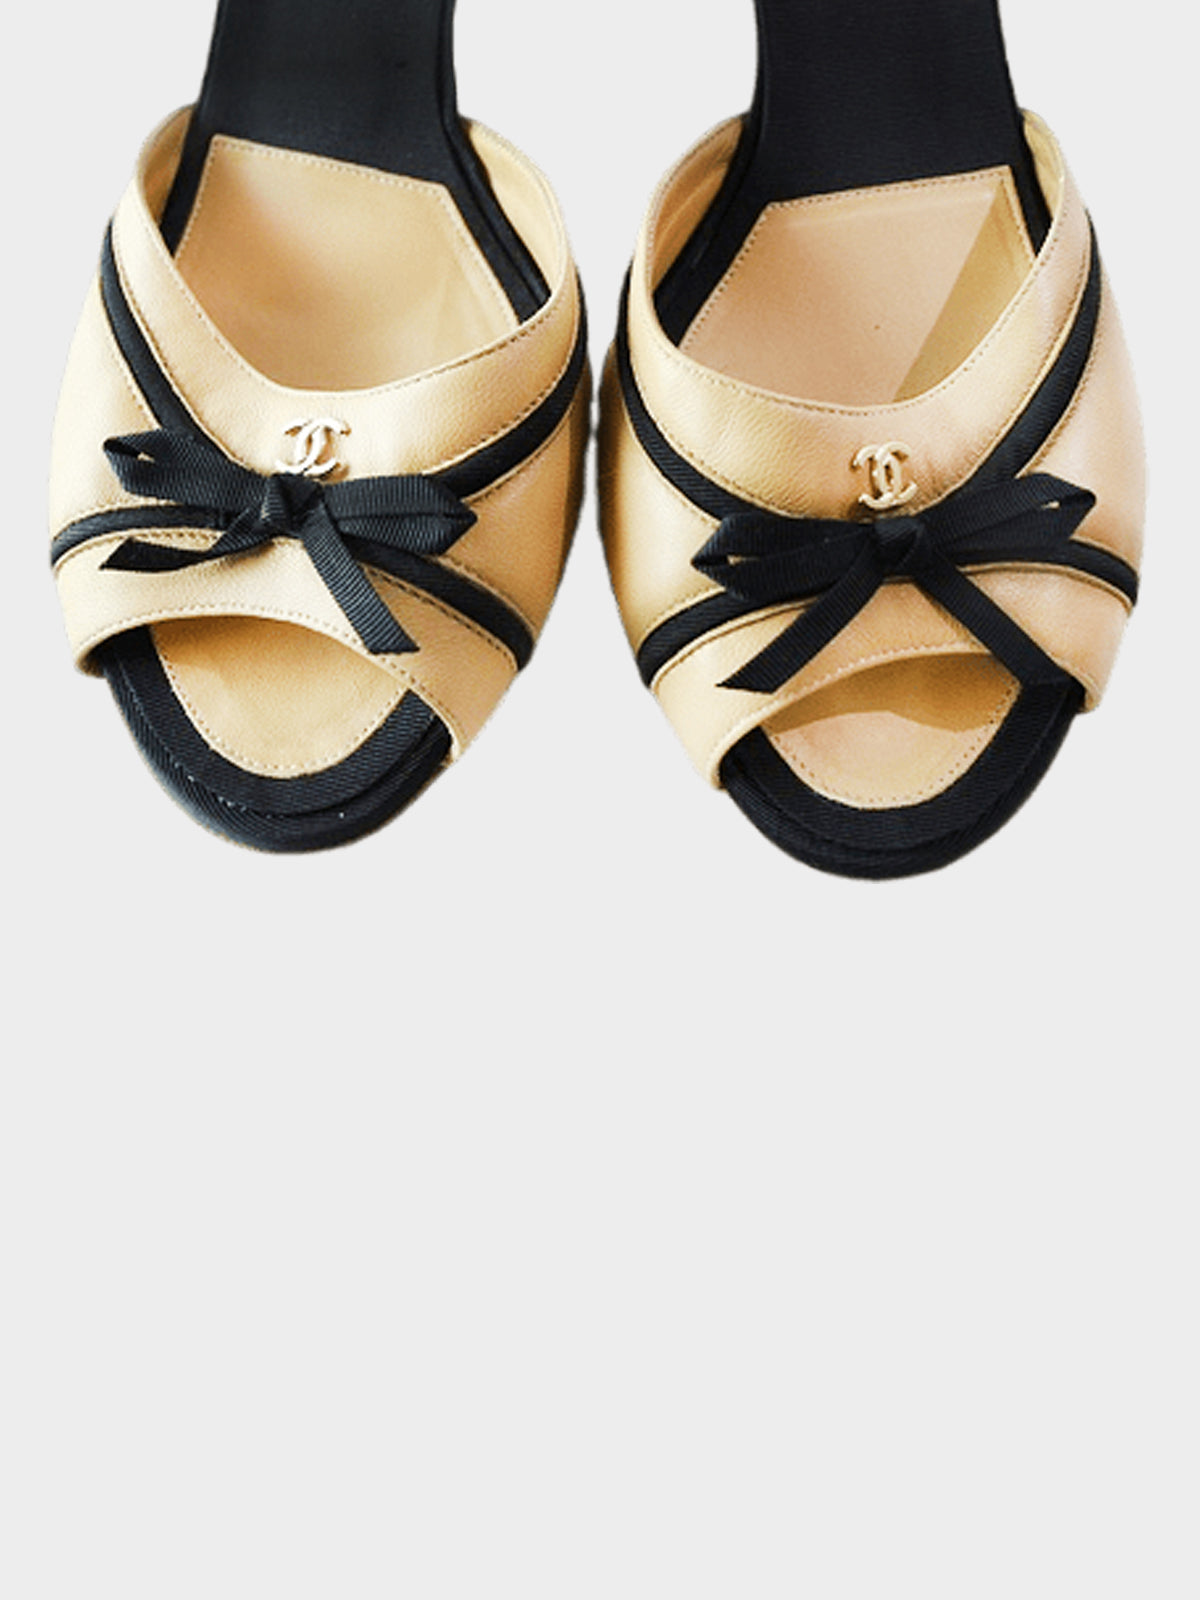 CHANEL 2000s Ballerina Satin Lace-Up Heels in Midnight- Size FR37.5